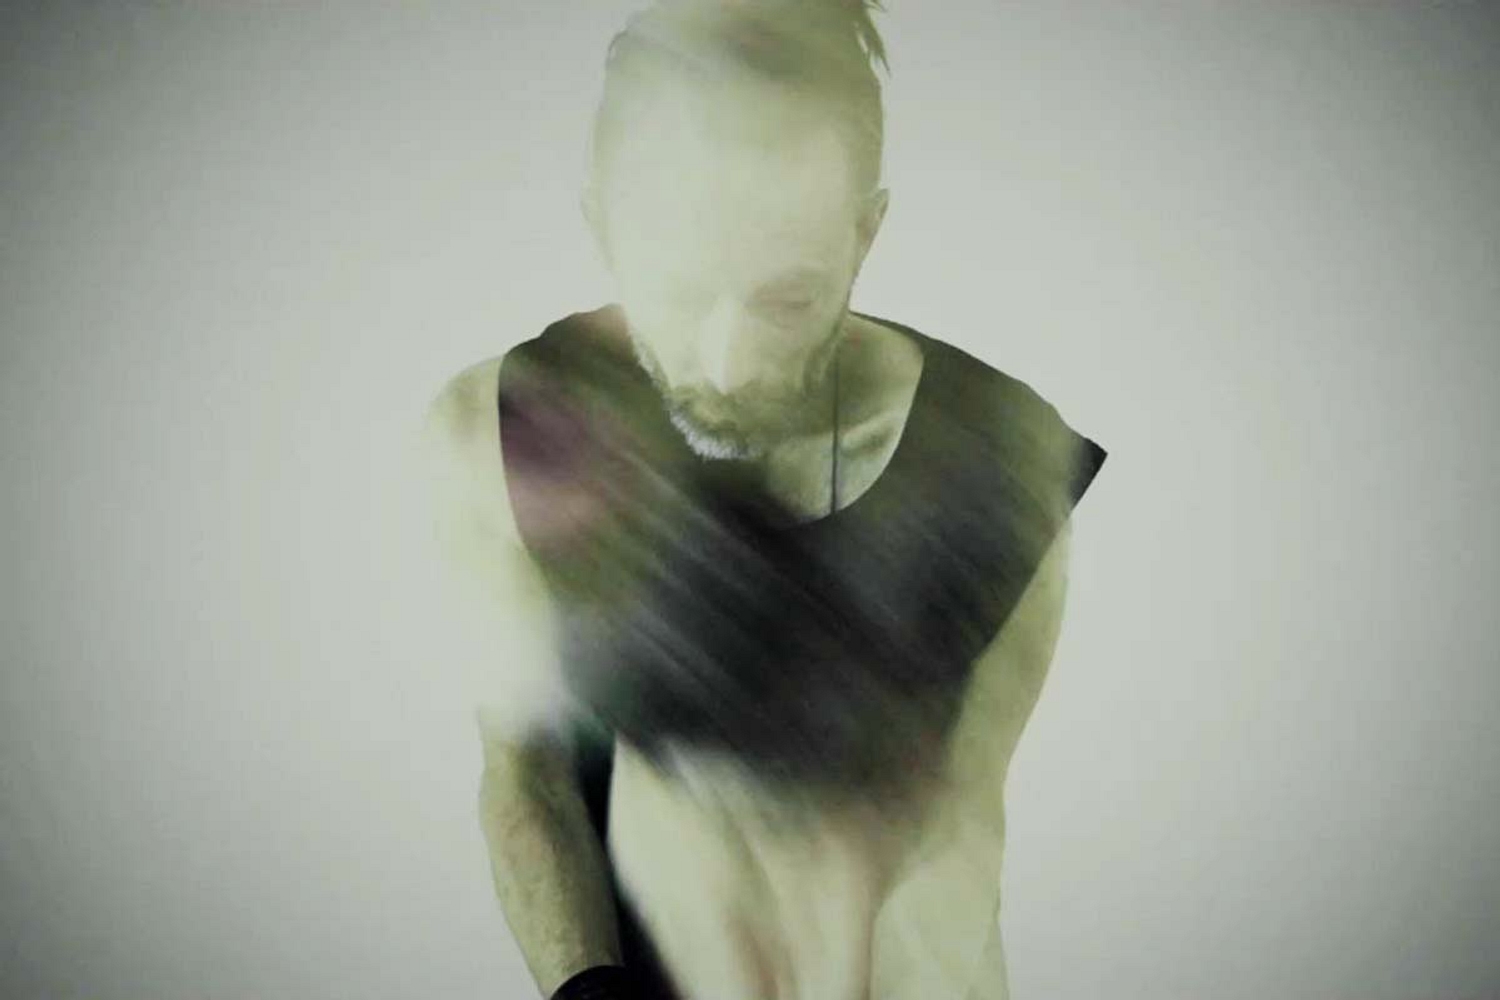 Hear Thom Yorke and Robert Del Naja’s score for tax avoidance film ‘The UK Gold’